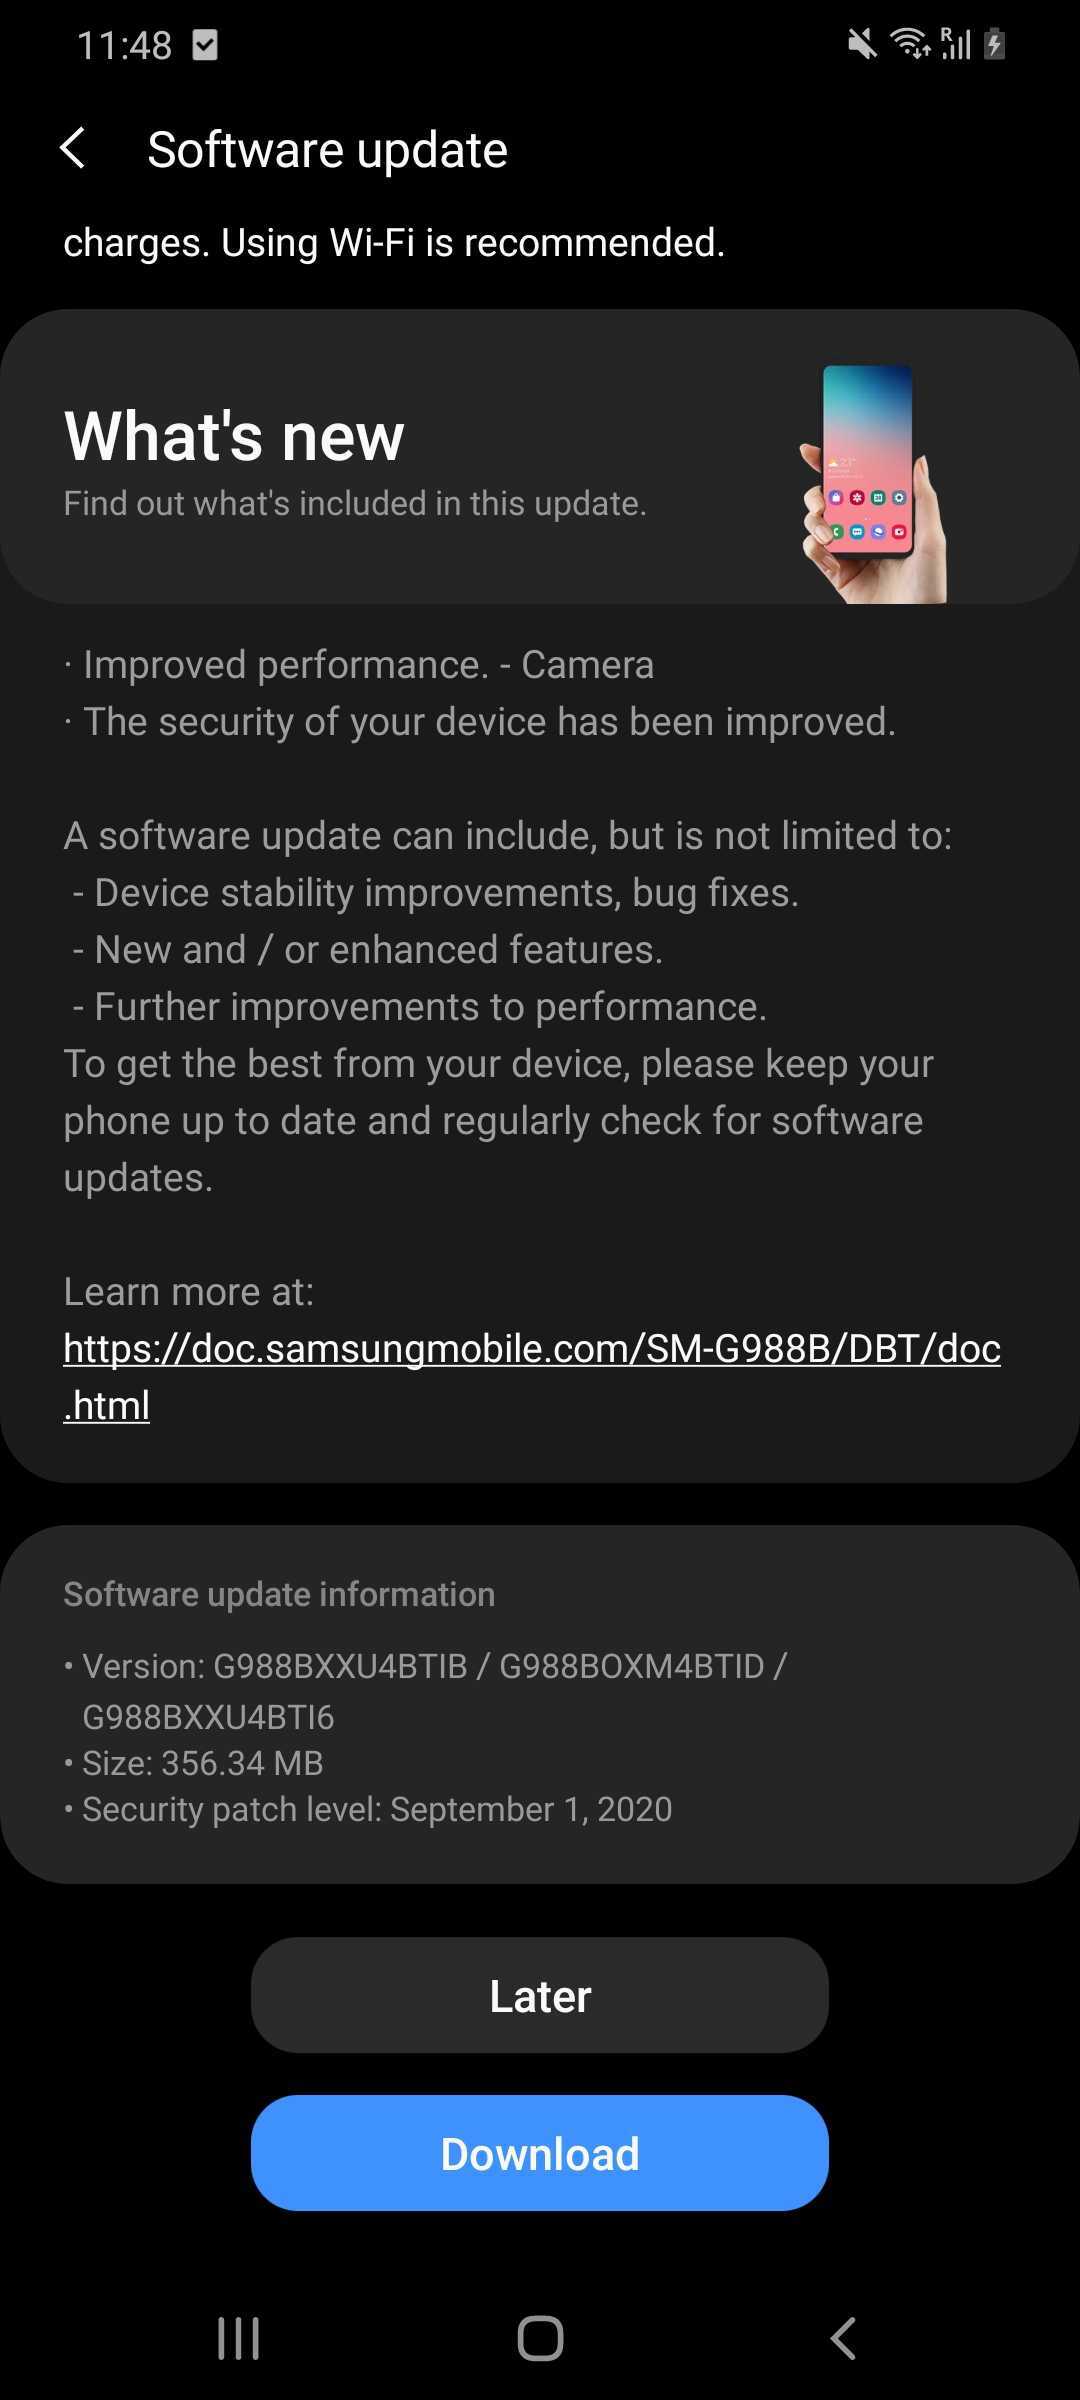 Samsung Galaxy S20 Ultra Software Update September 2020 Security Improved Camera